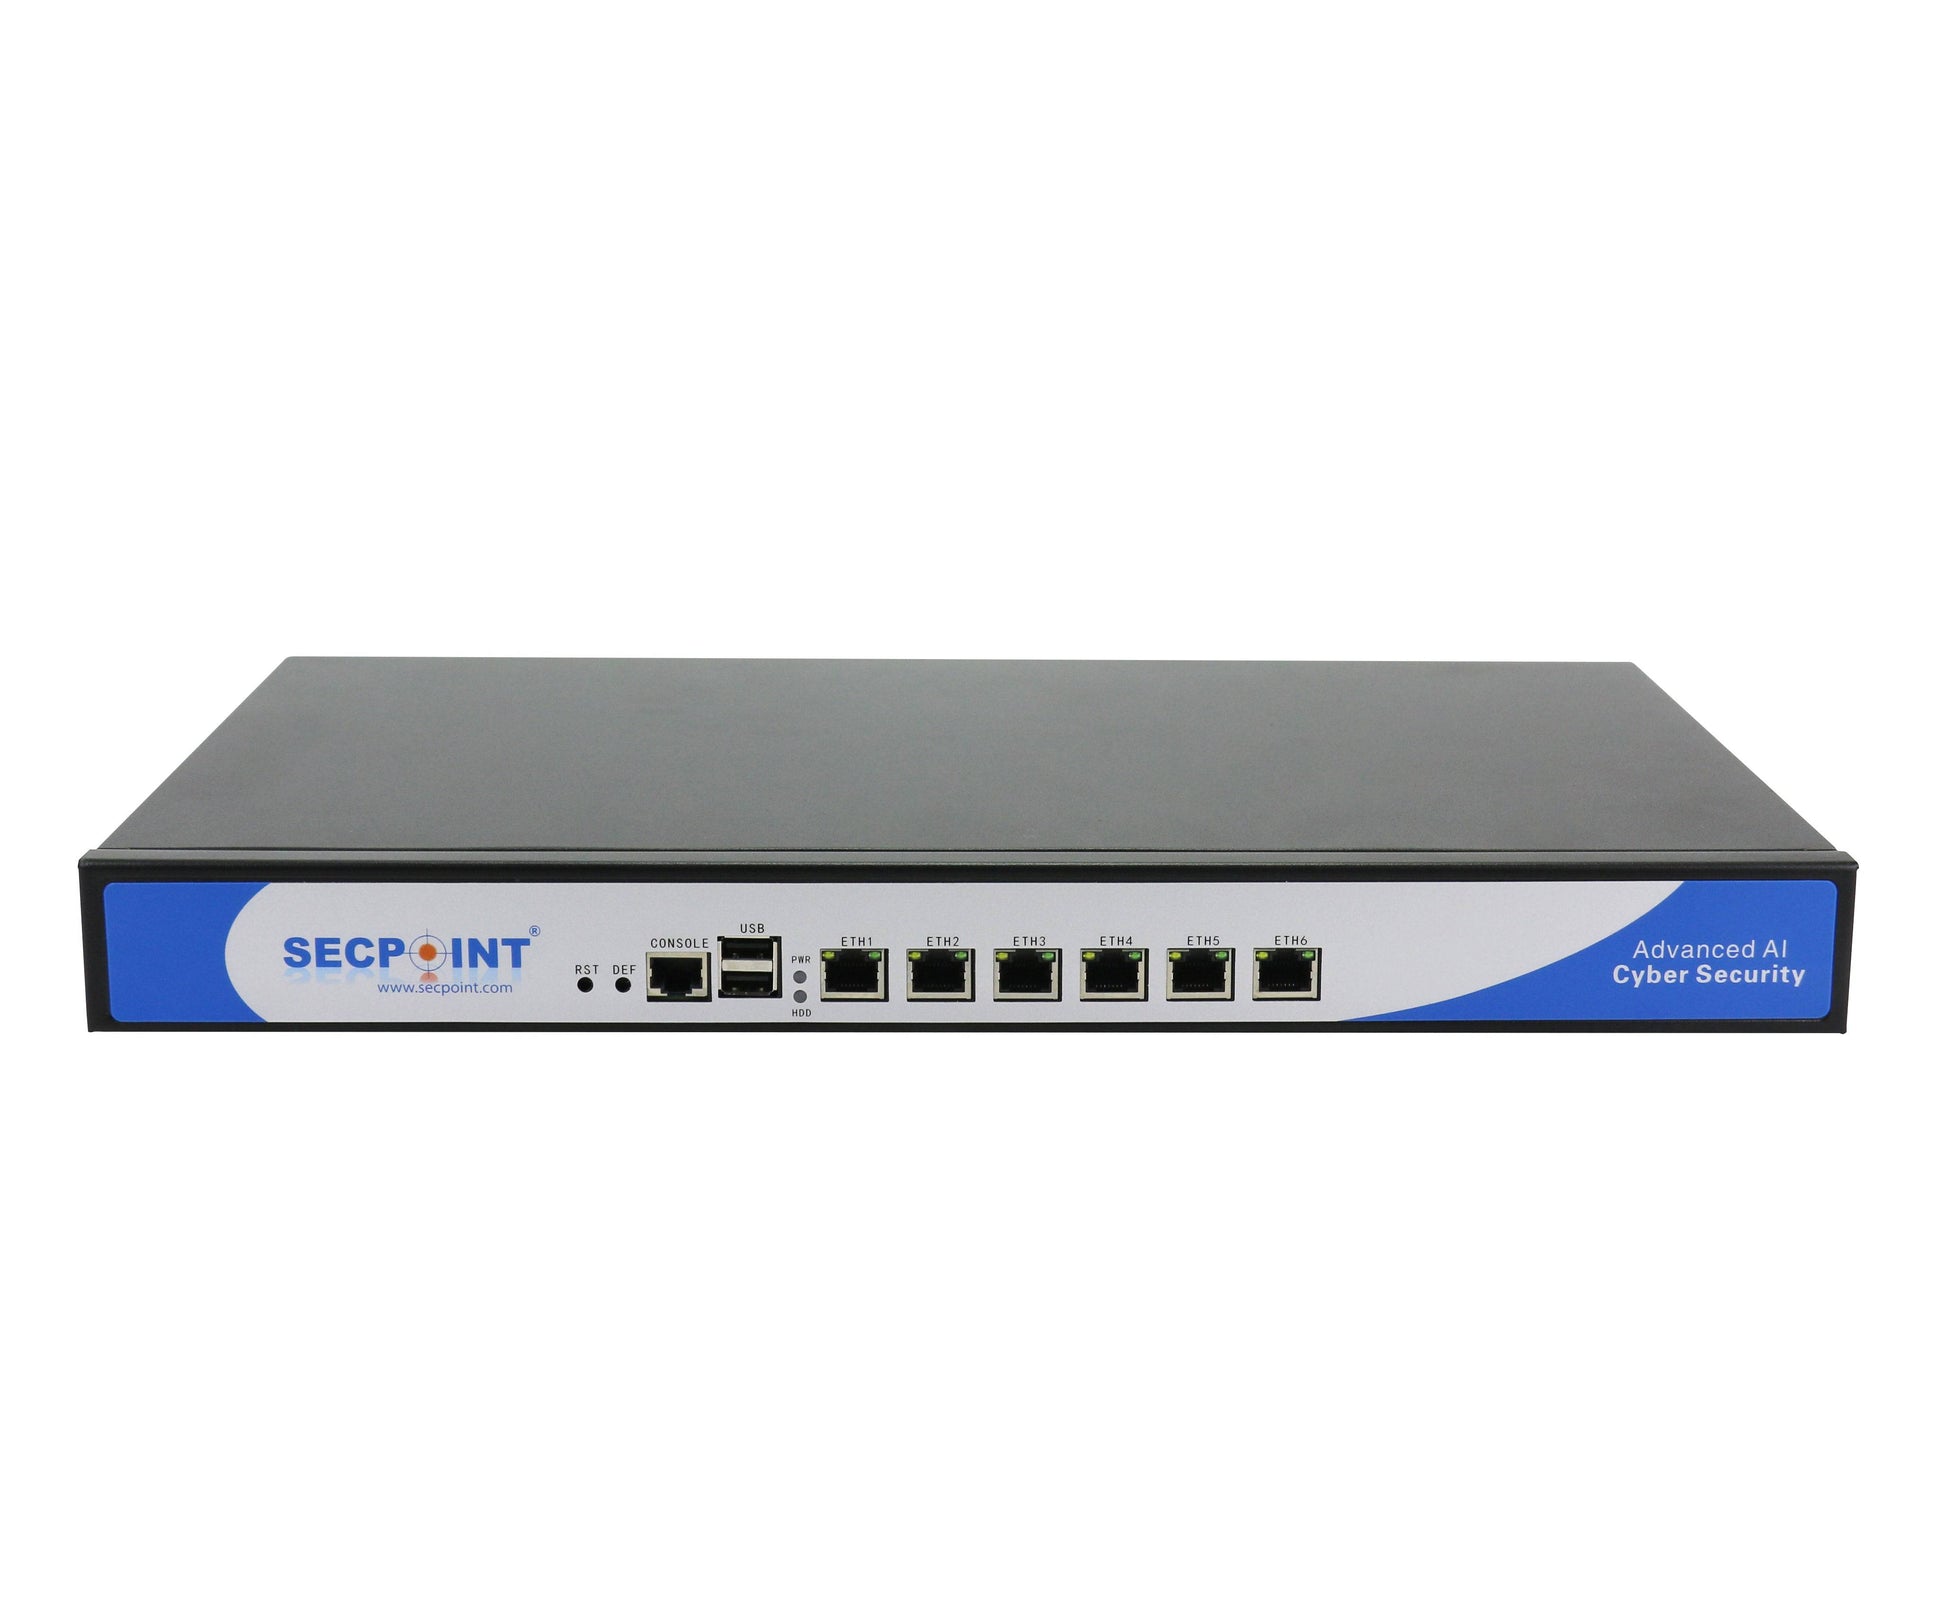 SecPoint Penetrator S9 - Vulnerability Scanning Pen Test Appliance - SecPoint